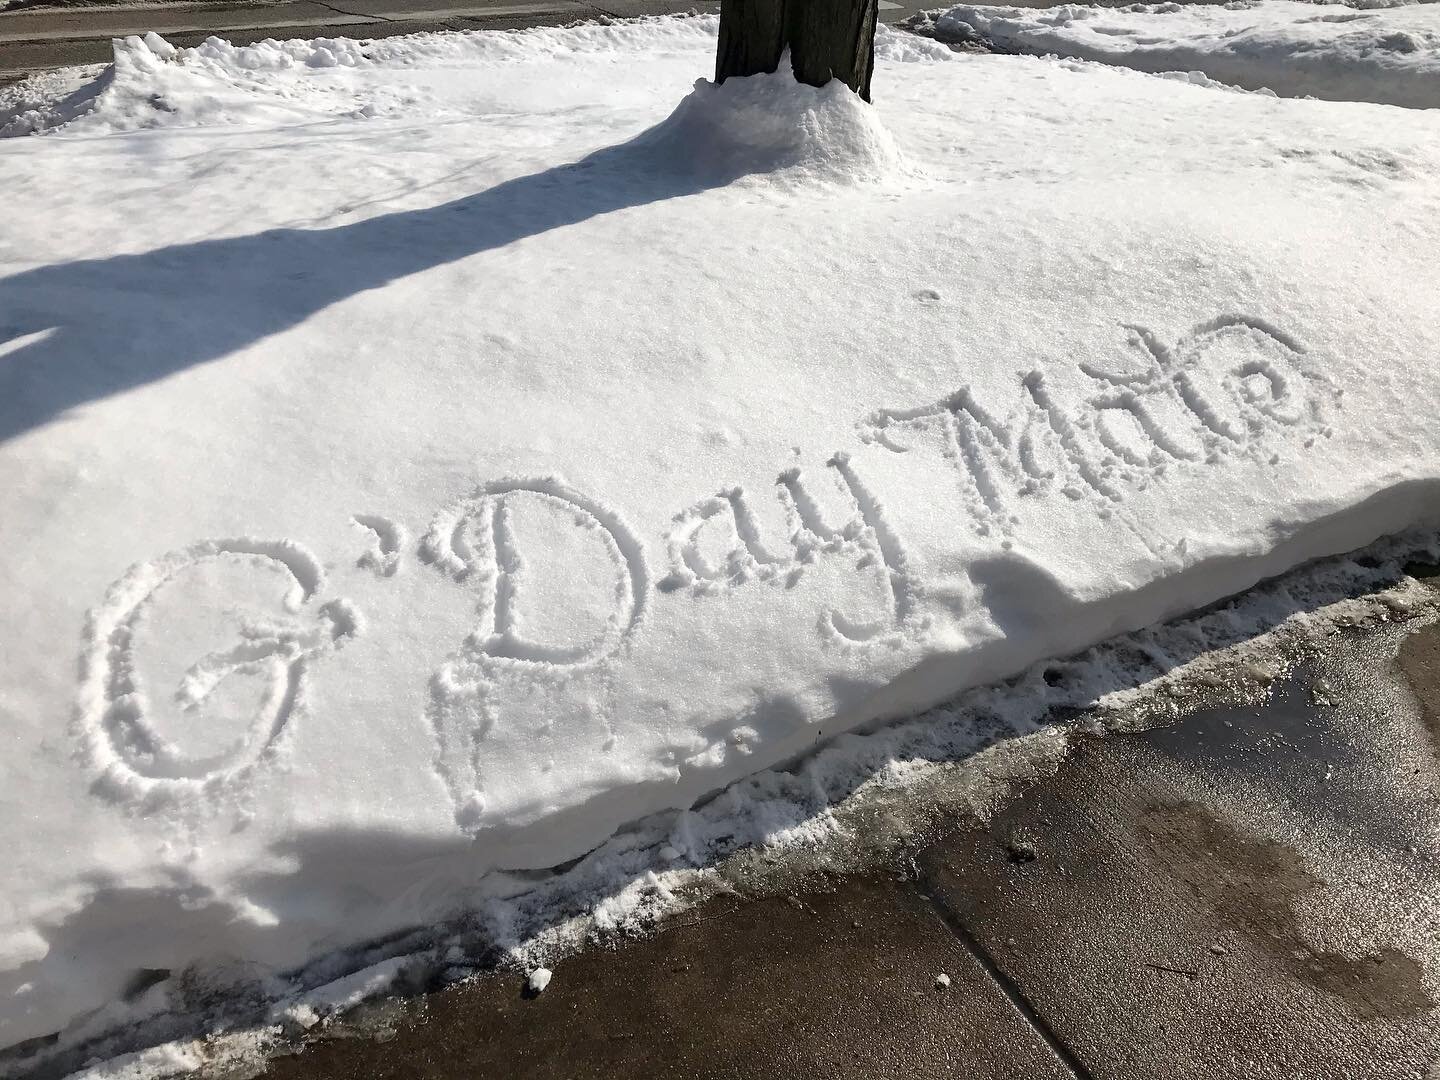 Sunny day crisping up the snow drifts so I can spread some positivity on my walk today ❄️ 🌞 #snowdrifts #snowwriting #handlettering #positivity #chicagosnow